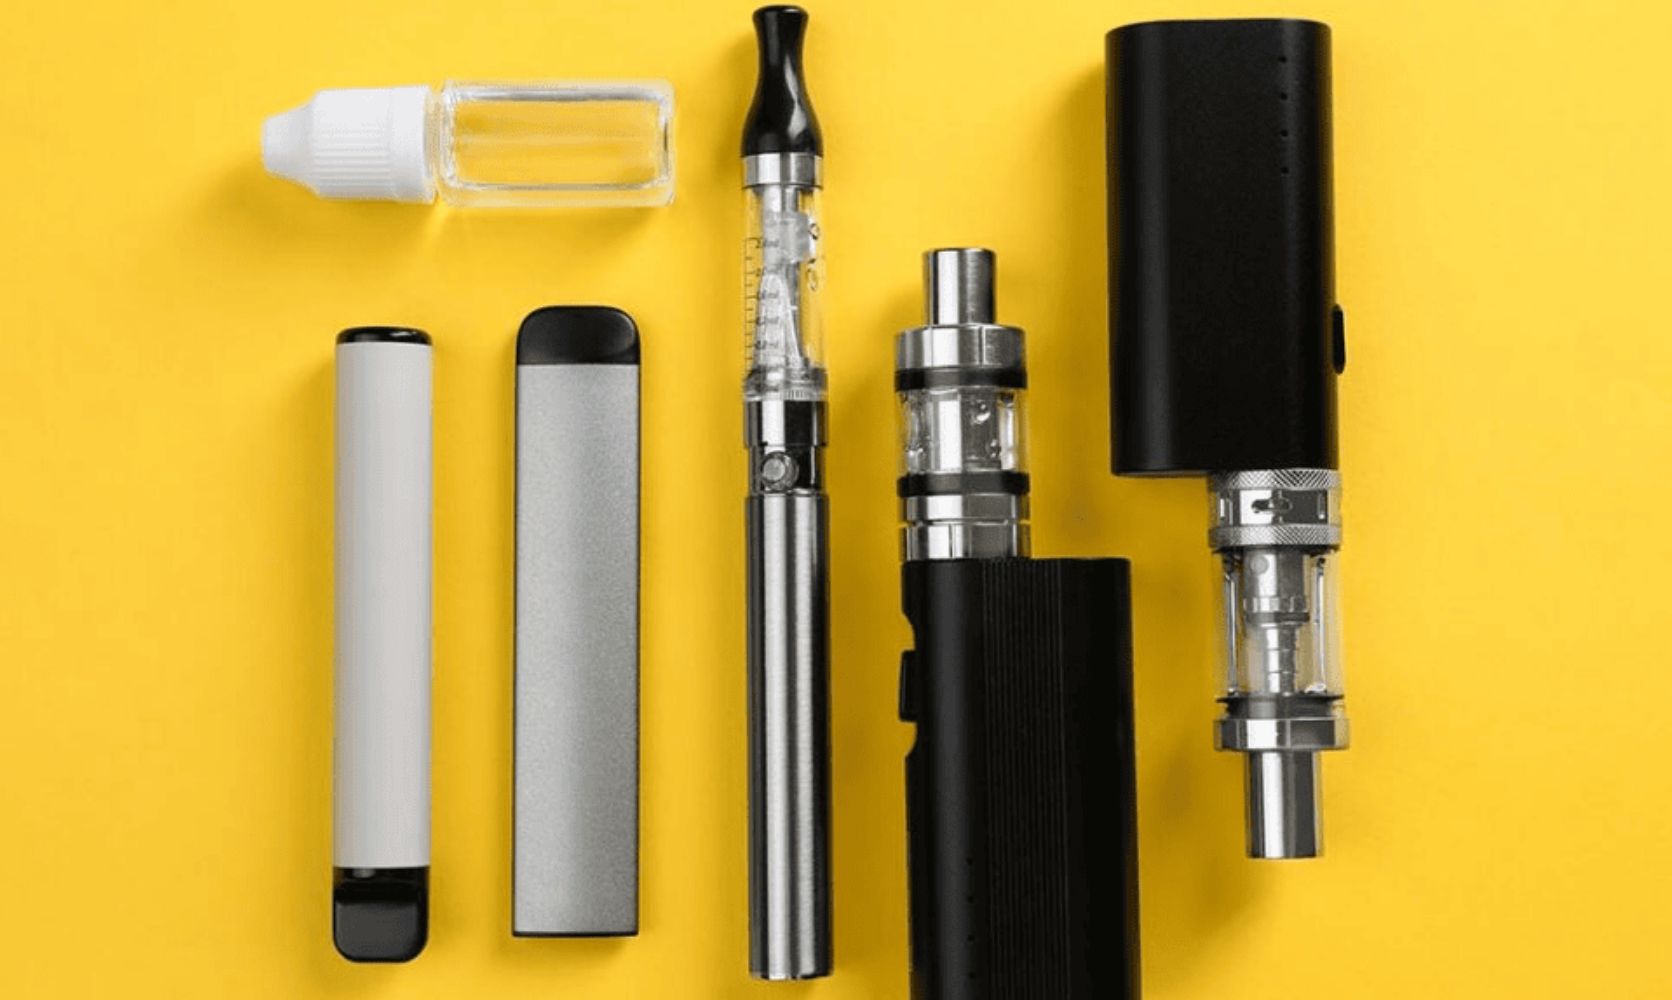 Are you thinking of trying a distillate pens in Canada? From how they work to filling them up, let's dive into the basics of THC vaping.